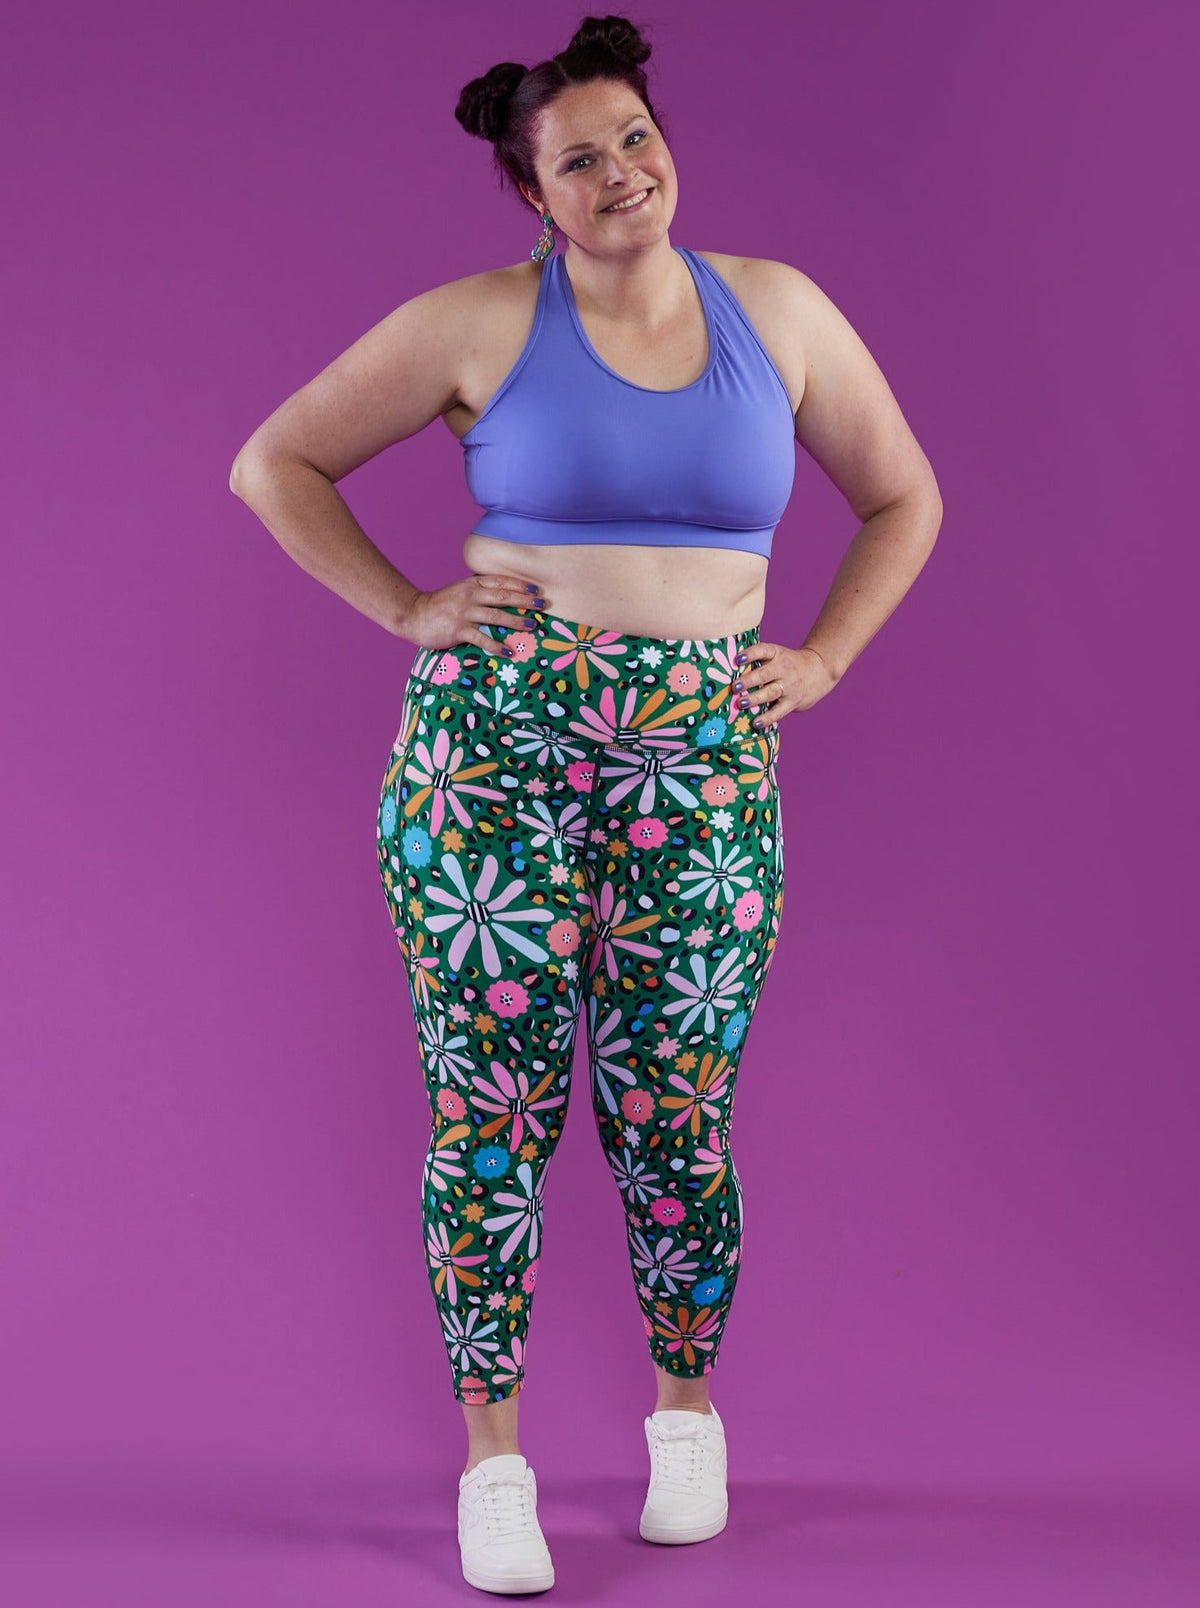 Wild Flower Everyday Legging - 7/8 length - high waisted leggings with pockets plus size